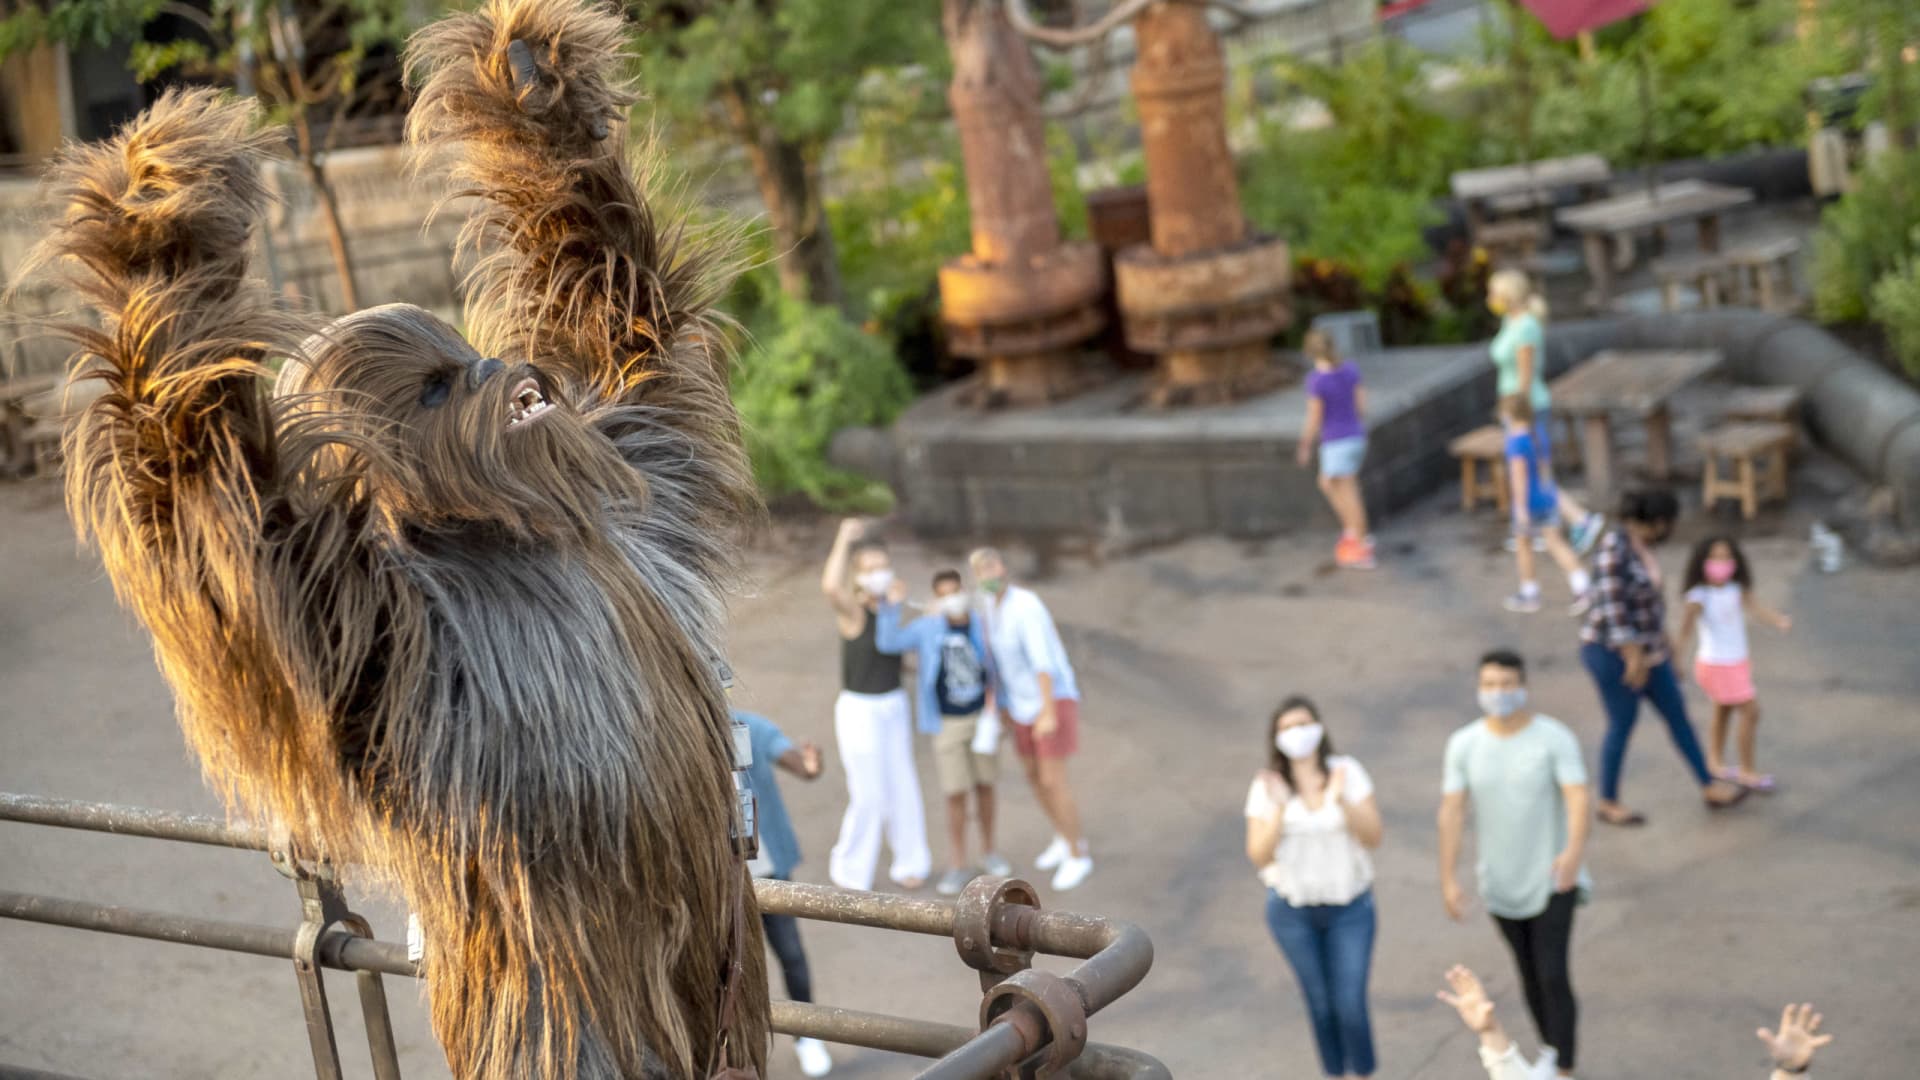 Chewbacca is seen at Disneyland Park on July 14, 2020 in Anaheim, California. Disneyland plans to reopen on April 30, 2021.